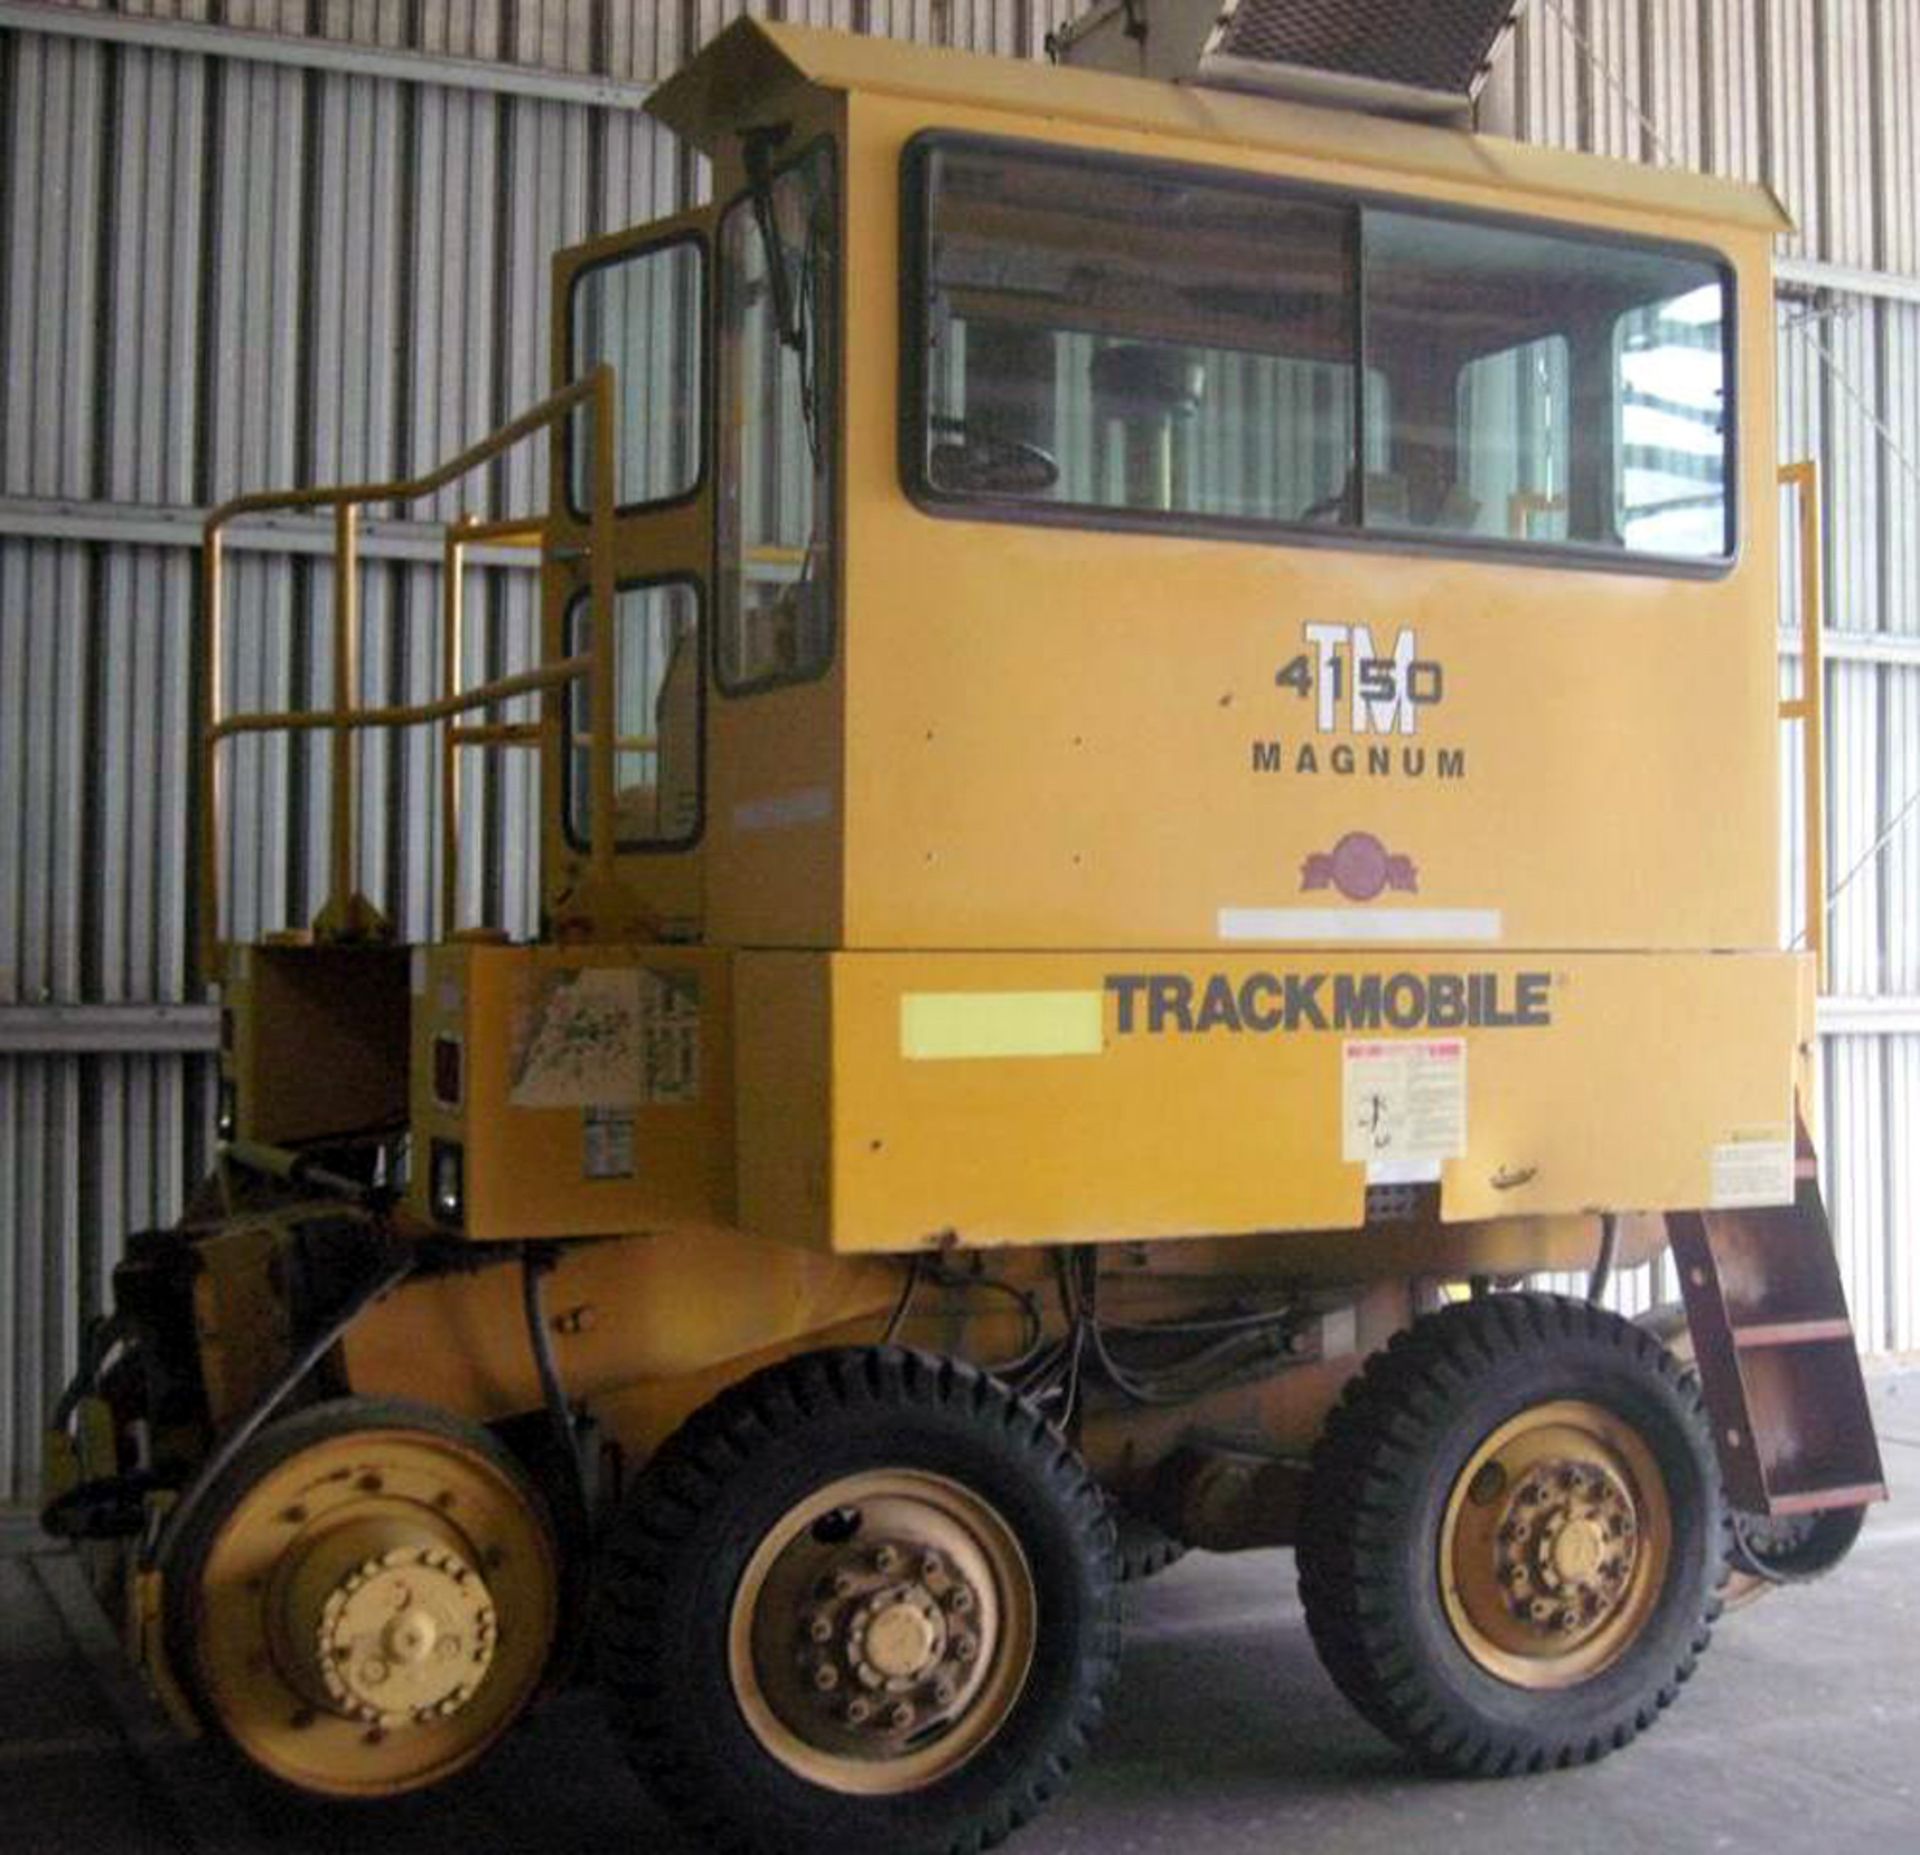 1998 Trackmobile Railcar Mover, Model: 4150, Serial #: LGN 971460898, Approx. Hours On Meter: 4163 - Image 9 of 10